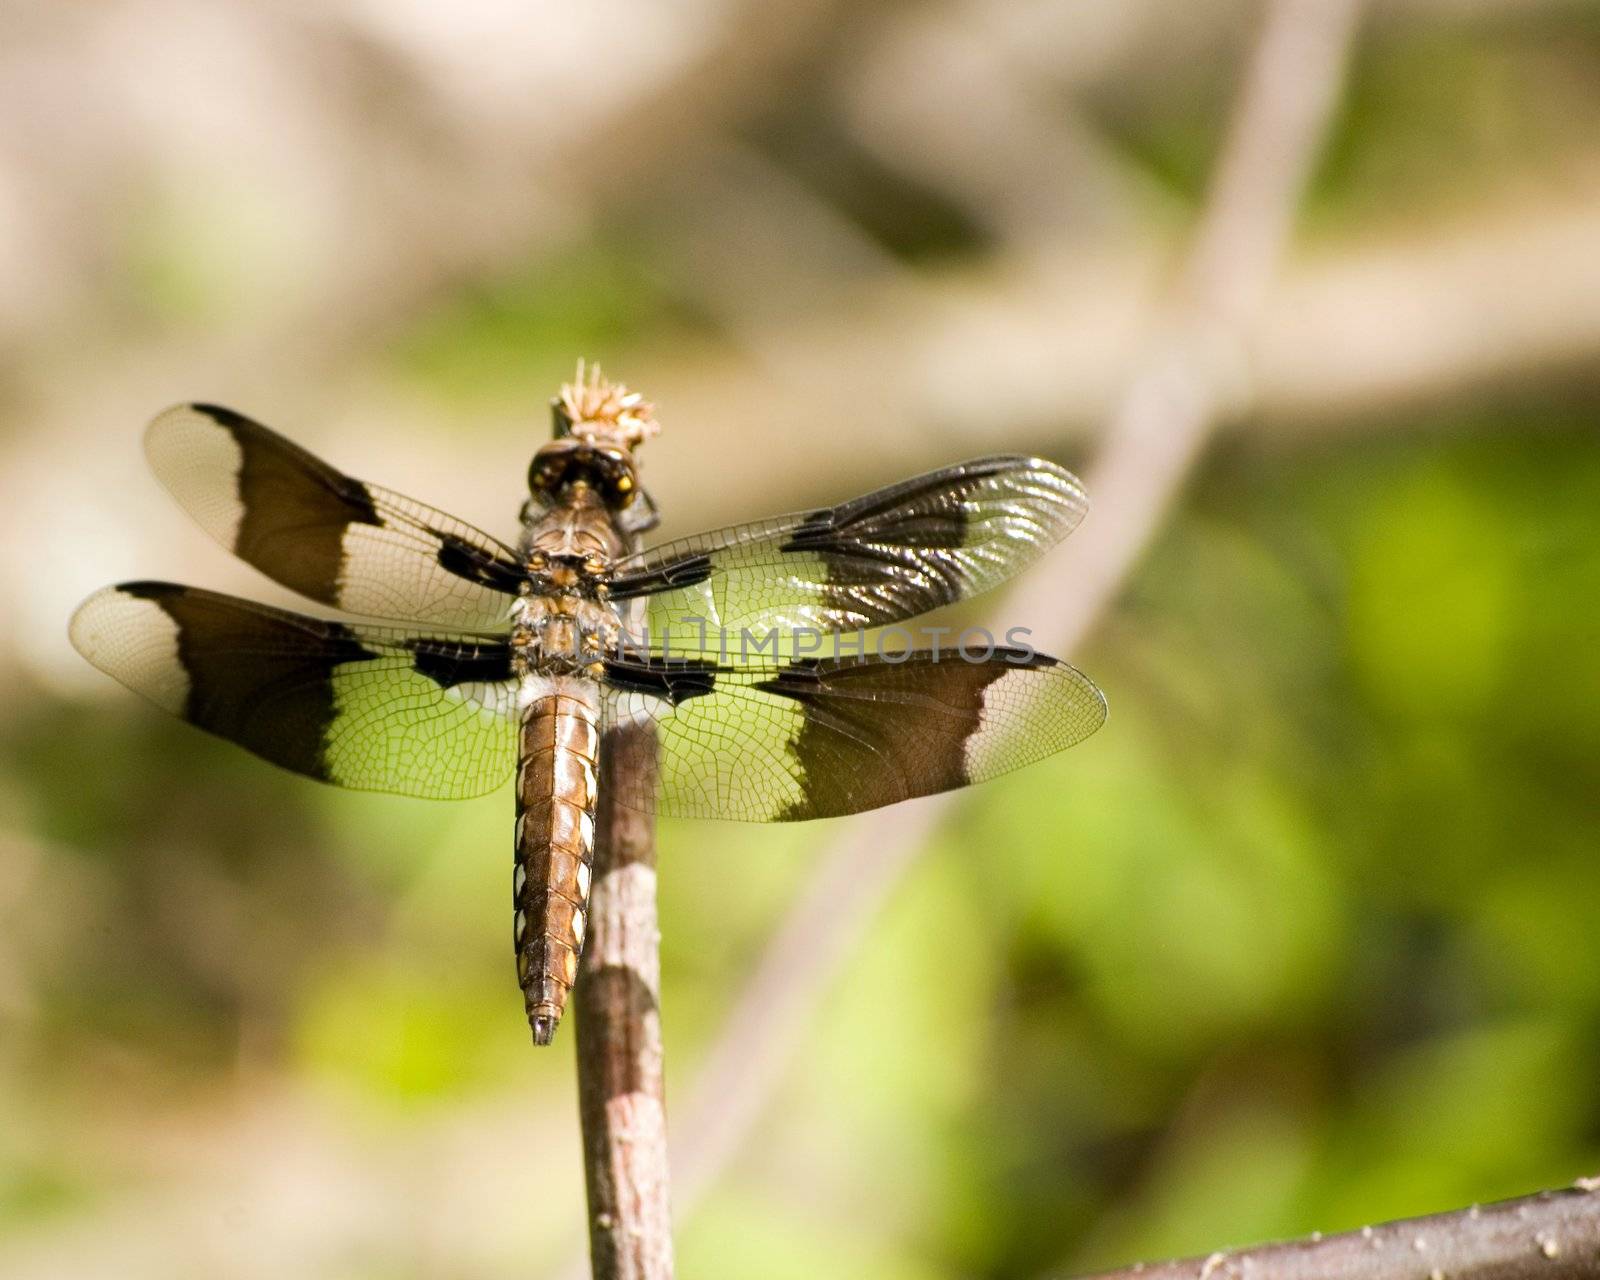 A dragonfly perched on a small twig.